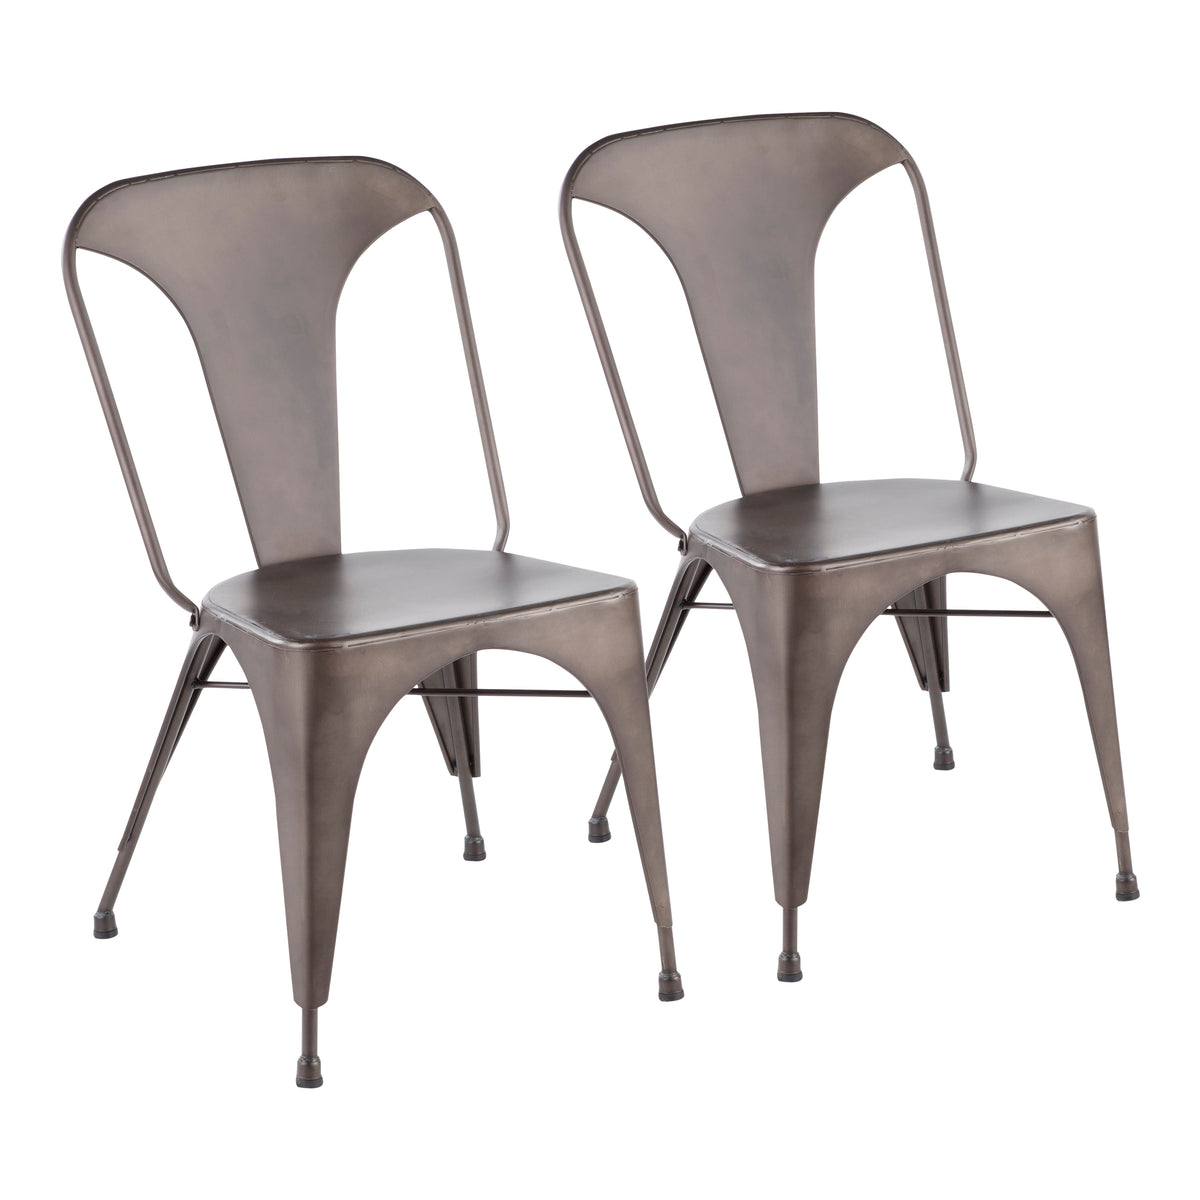 Industrial Dining Chair - Antique (Set of 2)